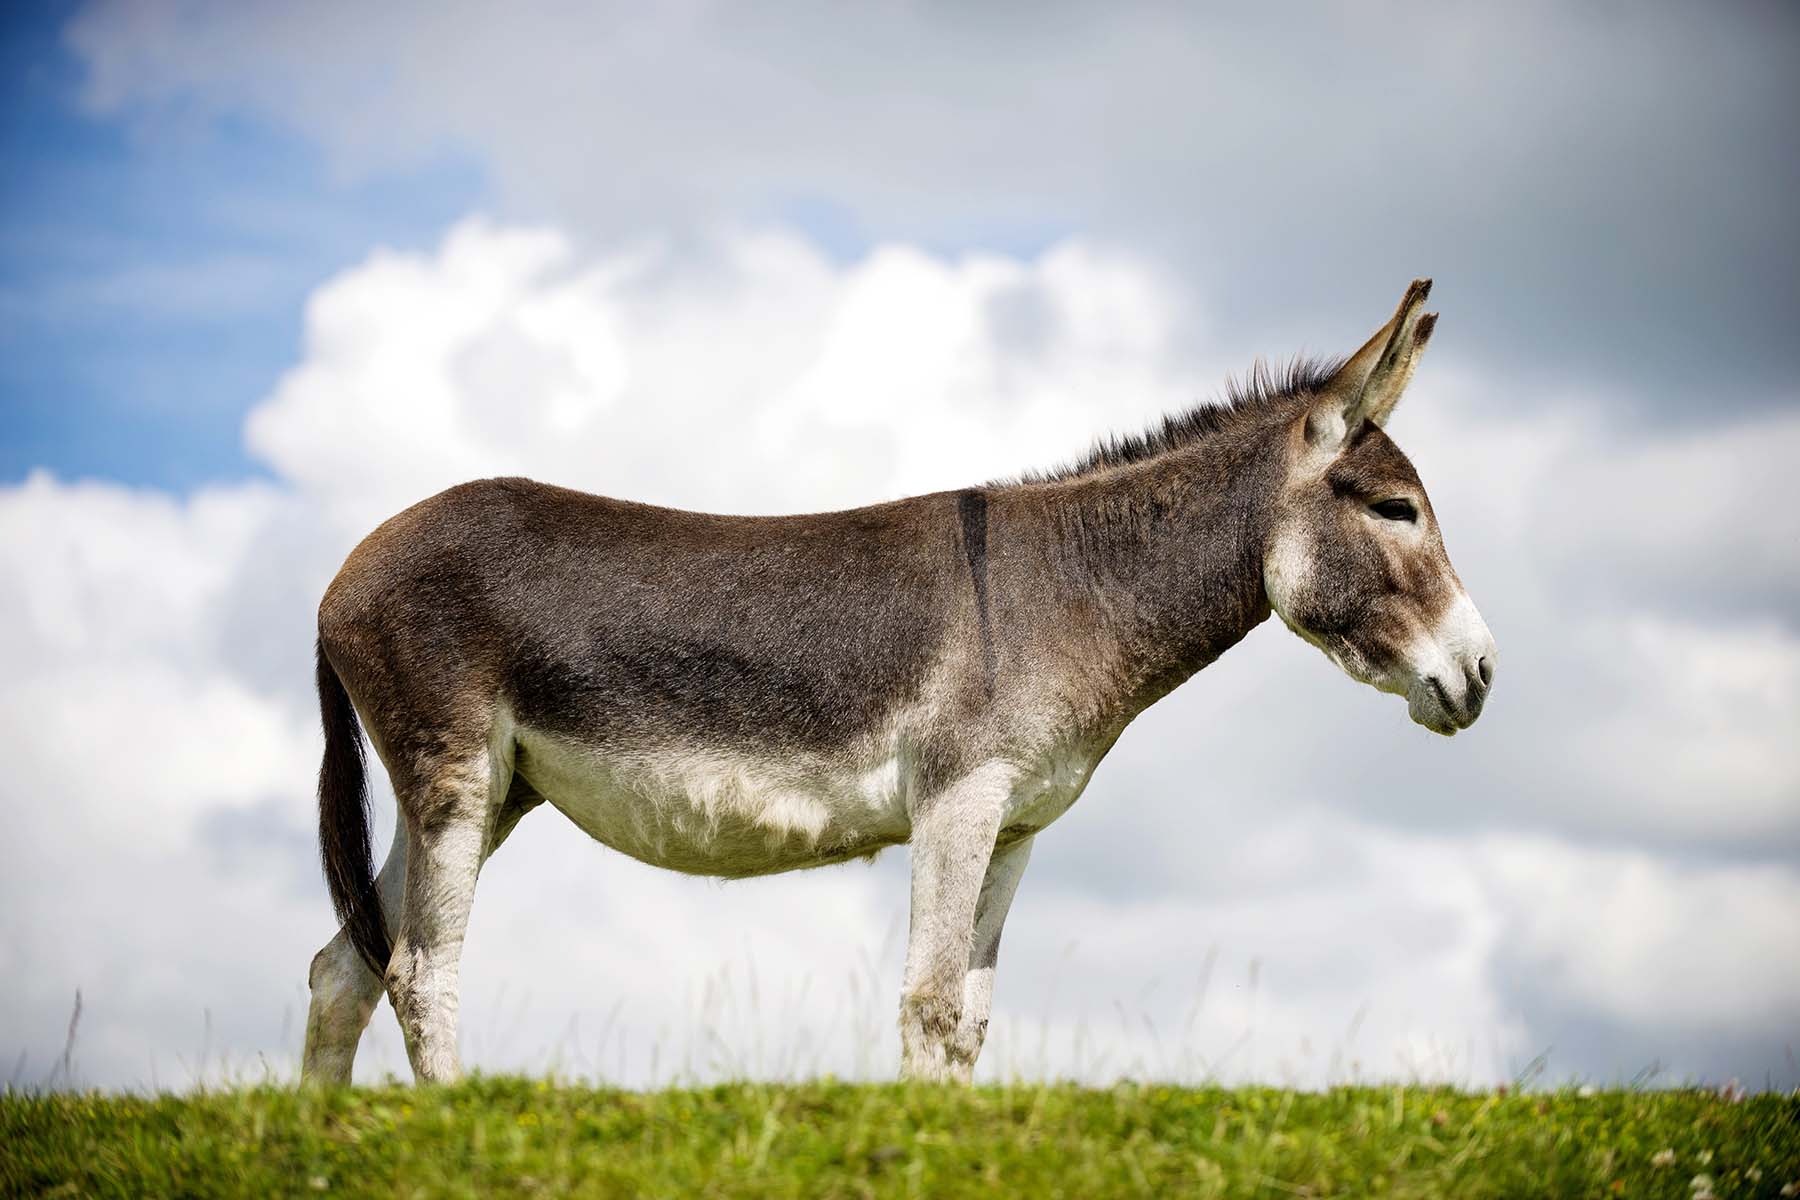 burro (noun) definition and synonyms | Macmillan Dictionary